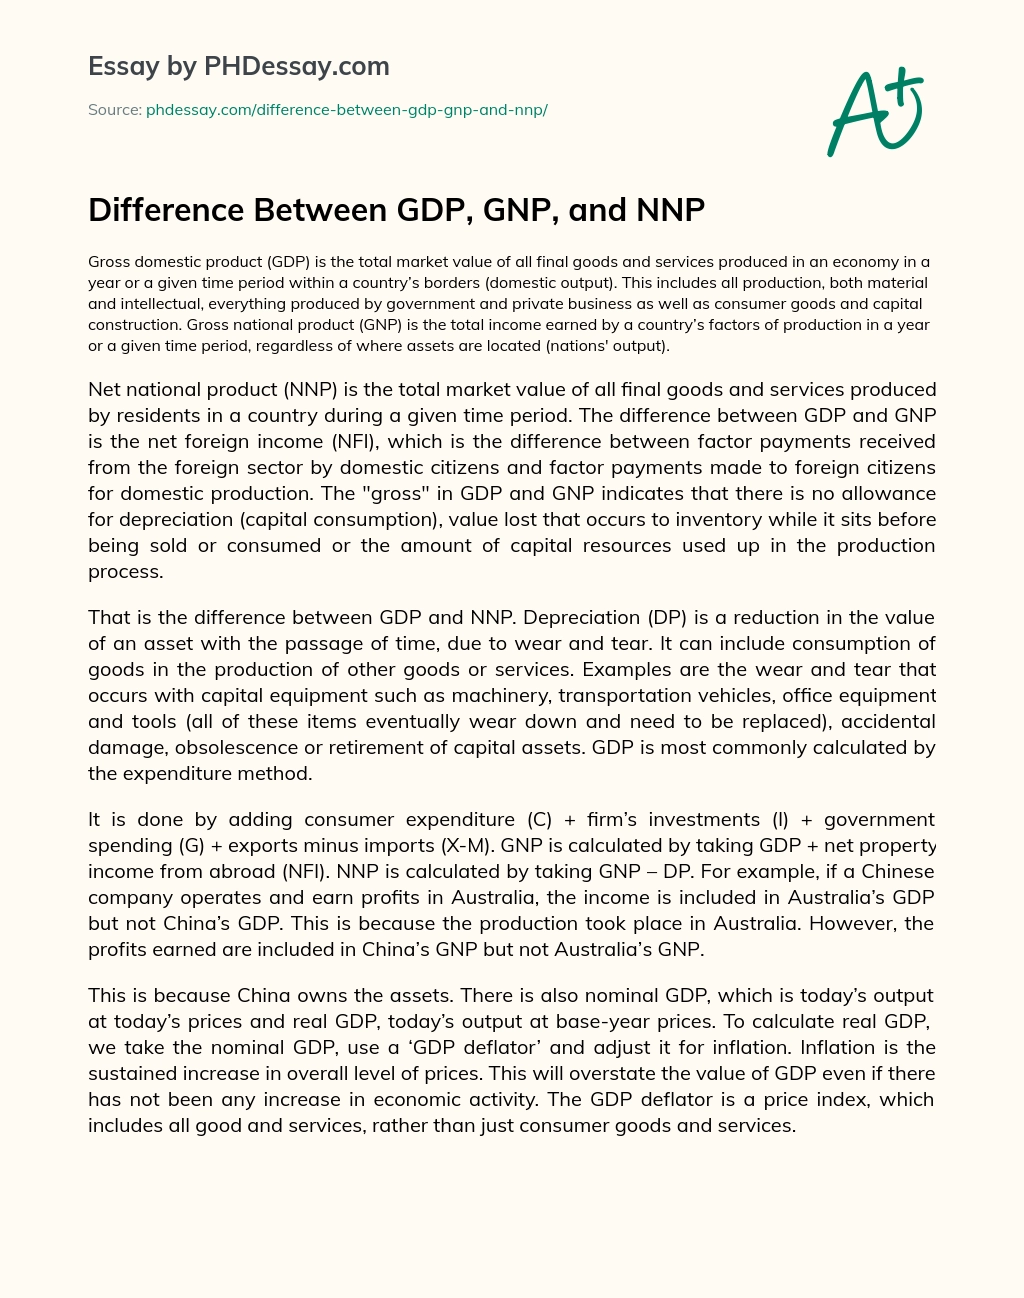 Difference Between GDP, GNP, and NNP essay